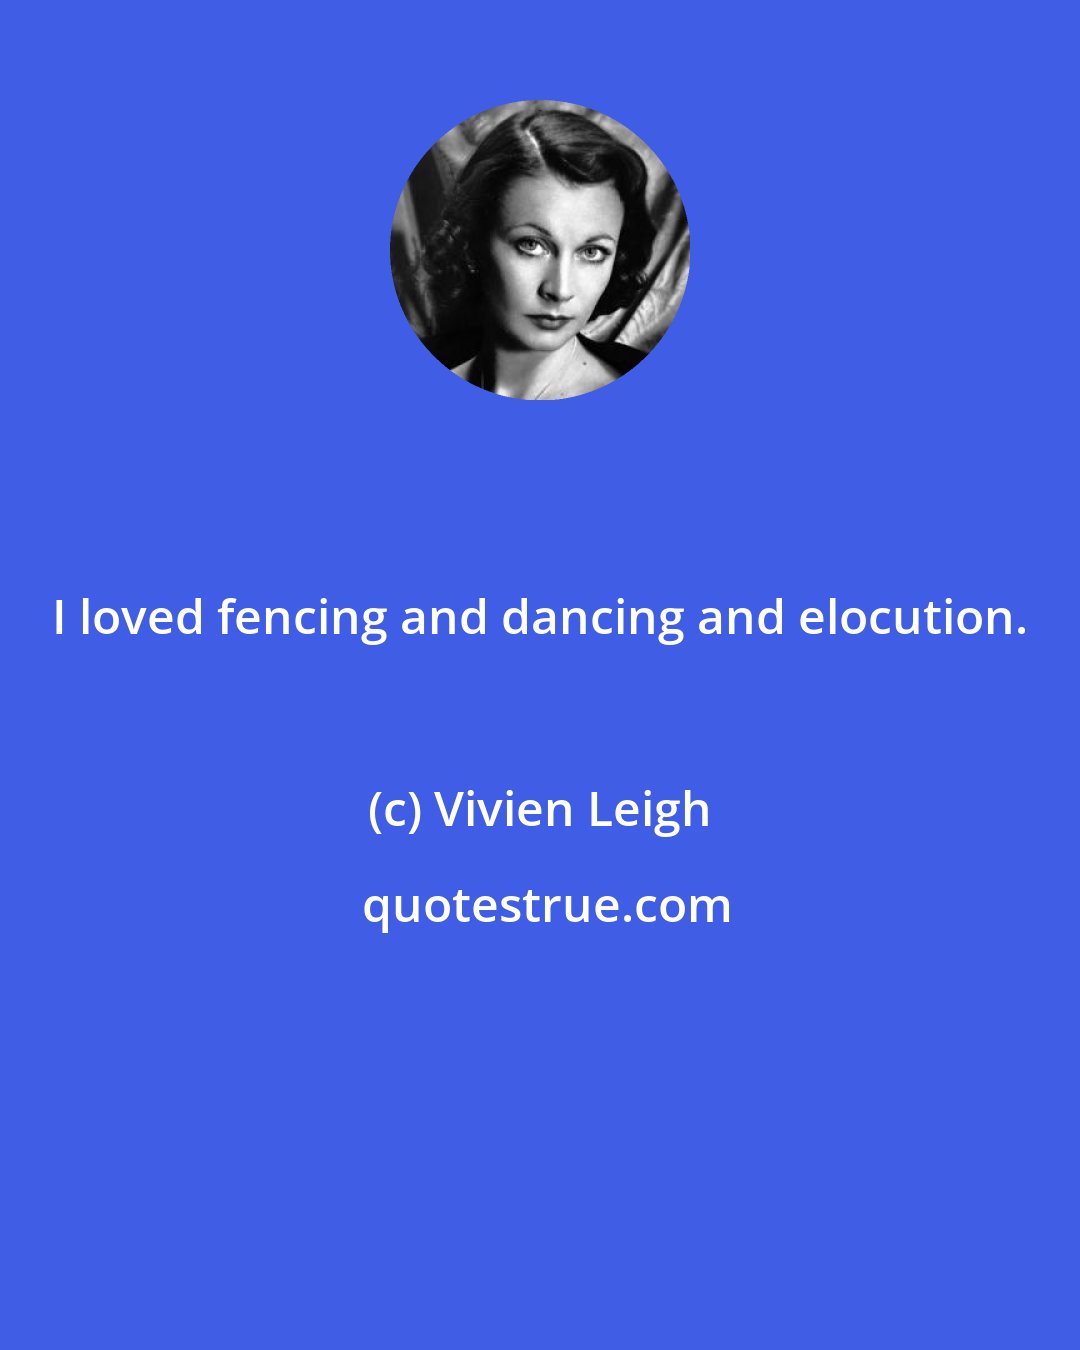 Vivien Leigh: I loved fencing and dancing and elocution.